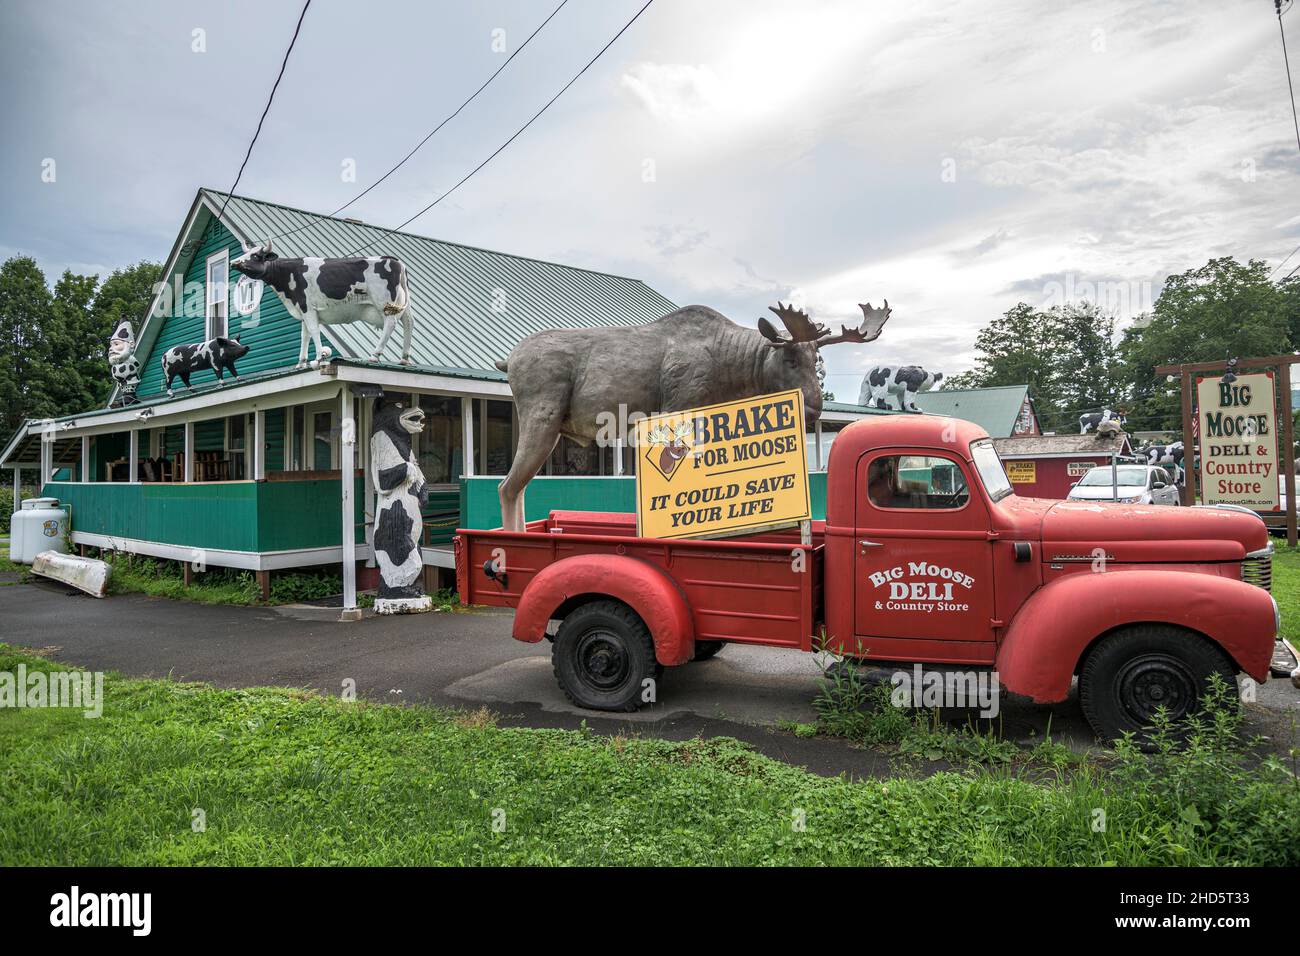 Inside an eclectic country store for travelers in rural Vermont, USA Stock Photo